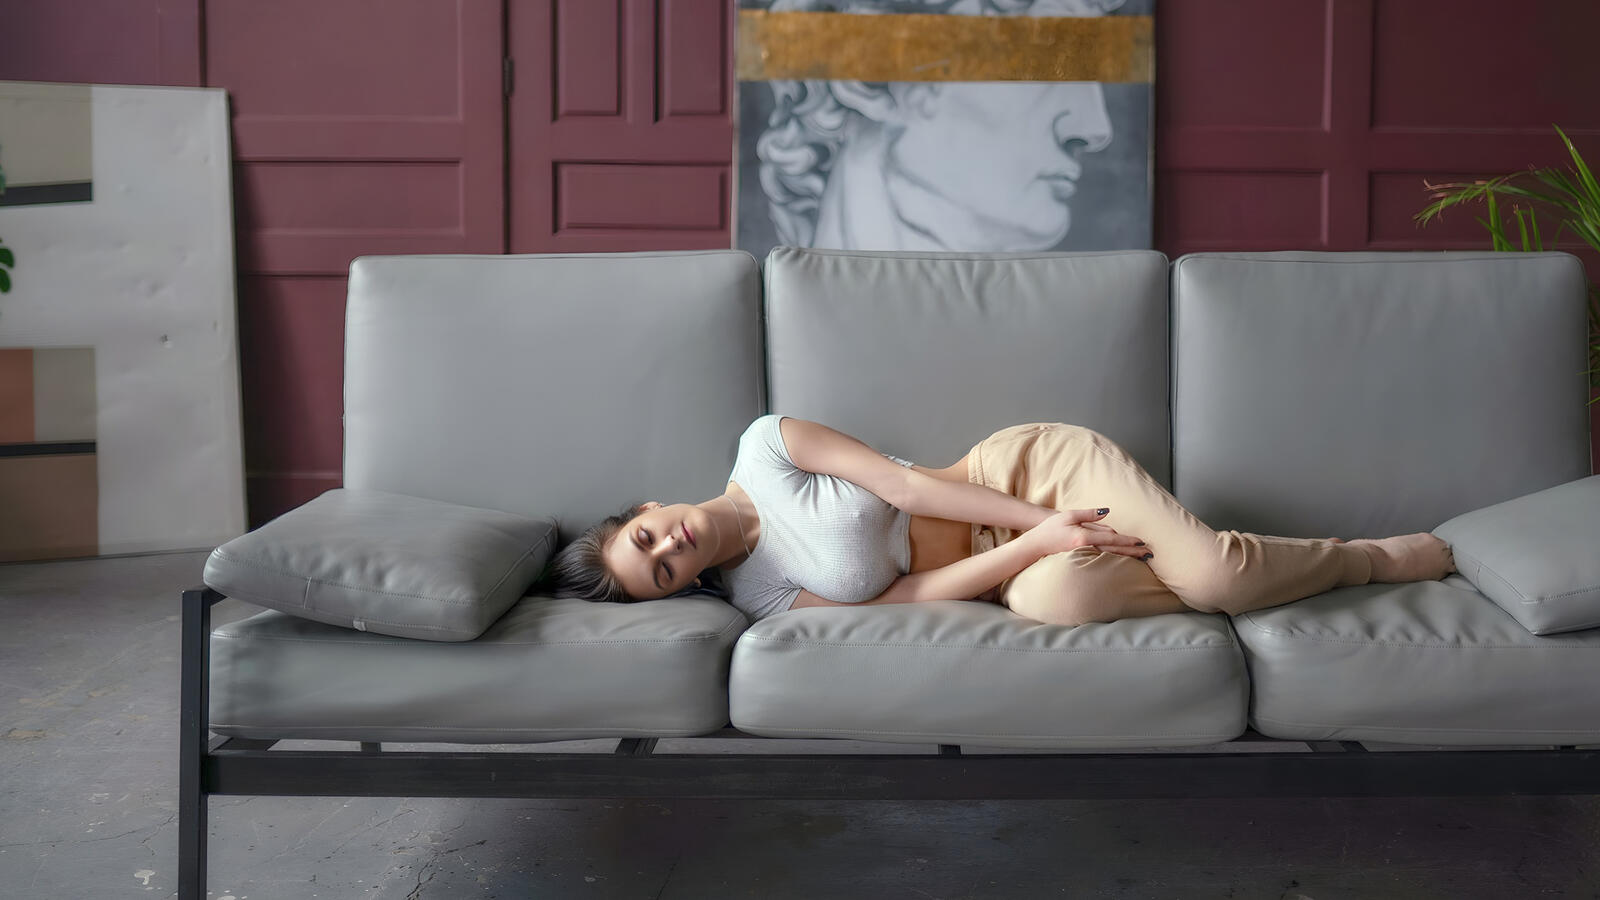 Free photo A girl resting on a gray couch